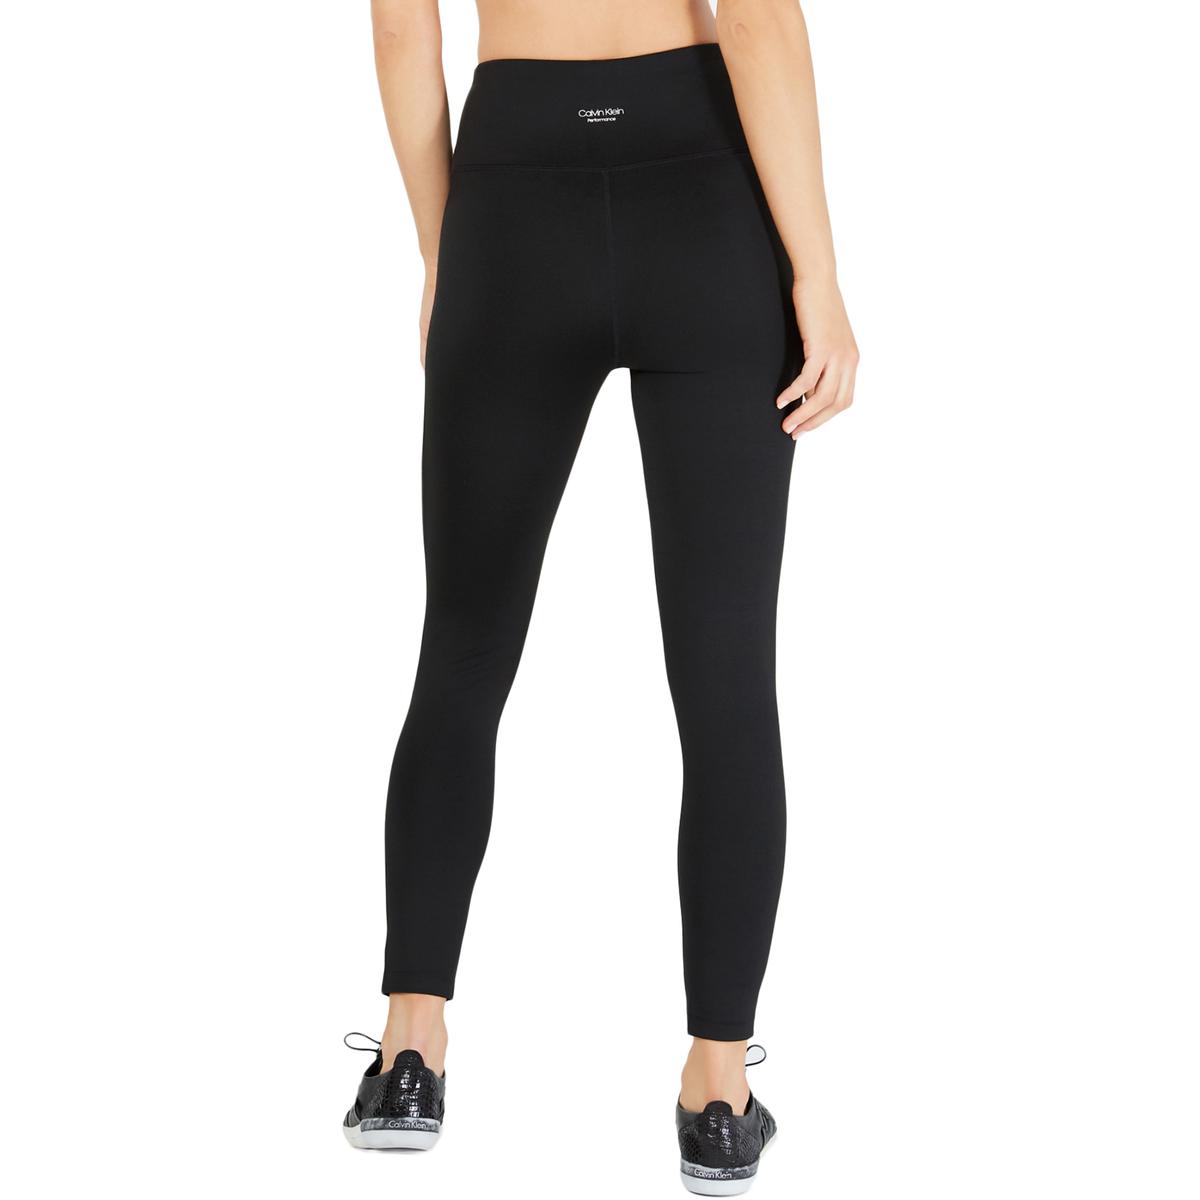 Calvin Klein Performance Stretch Compression Pants in Black for